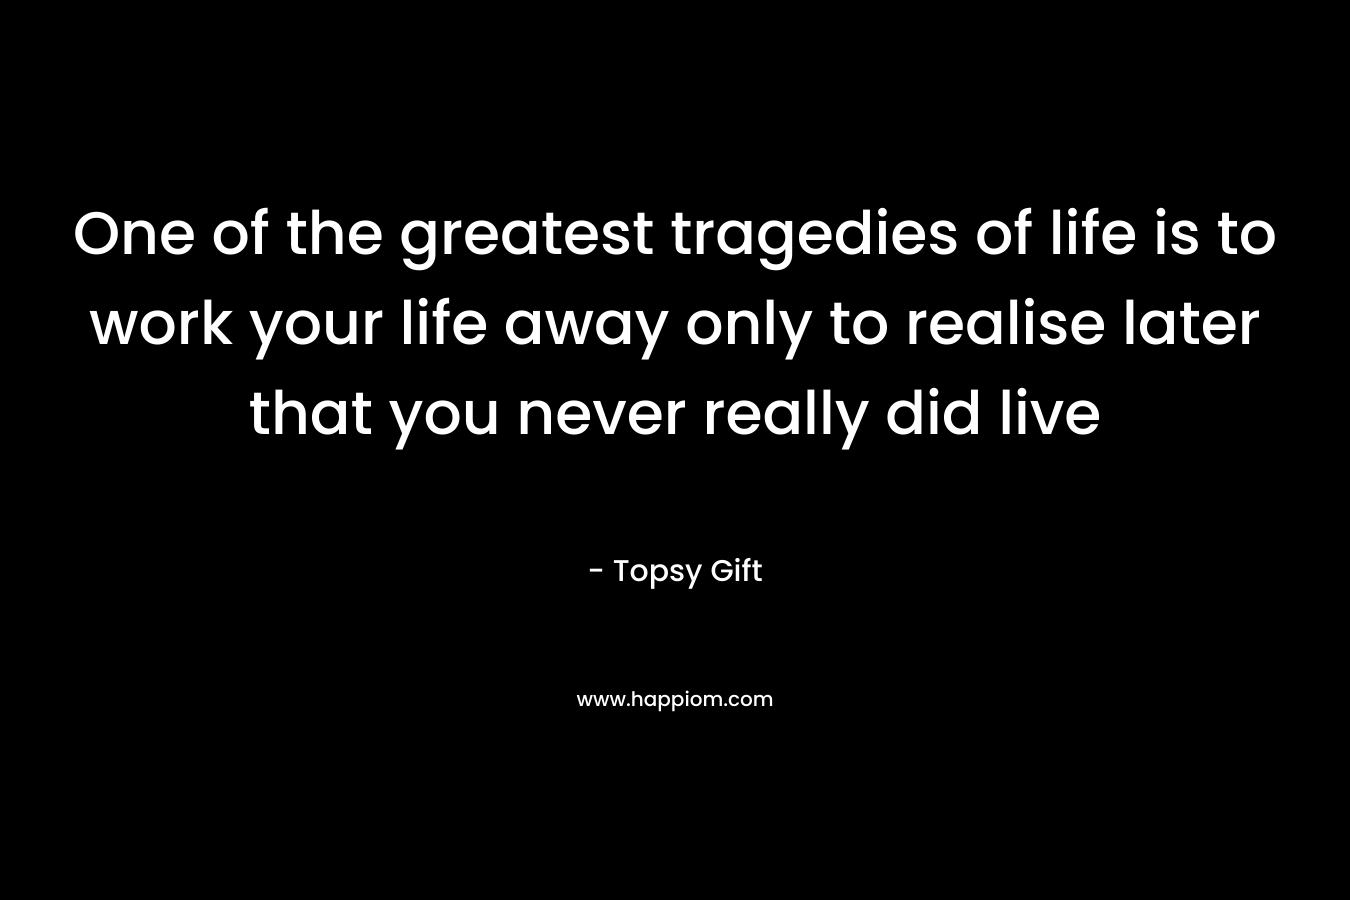 One of the greatest tragedies of life is to work your life away only to realise later that you never really did live – Topsy Gift